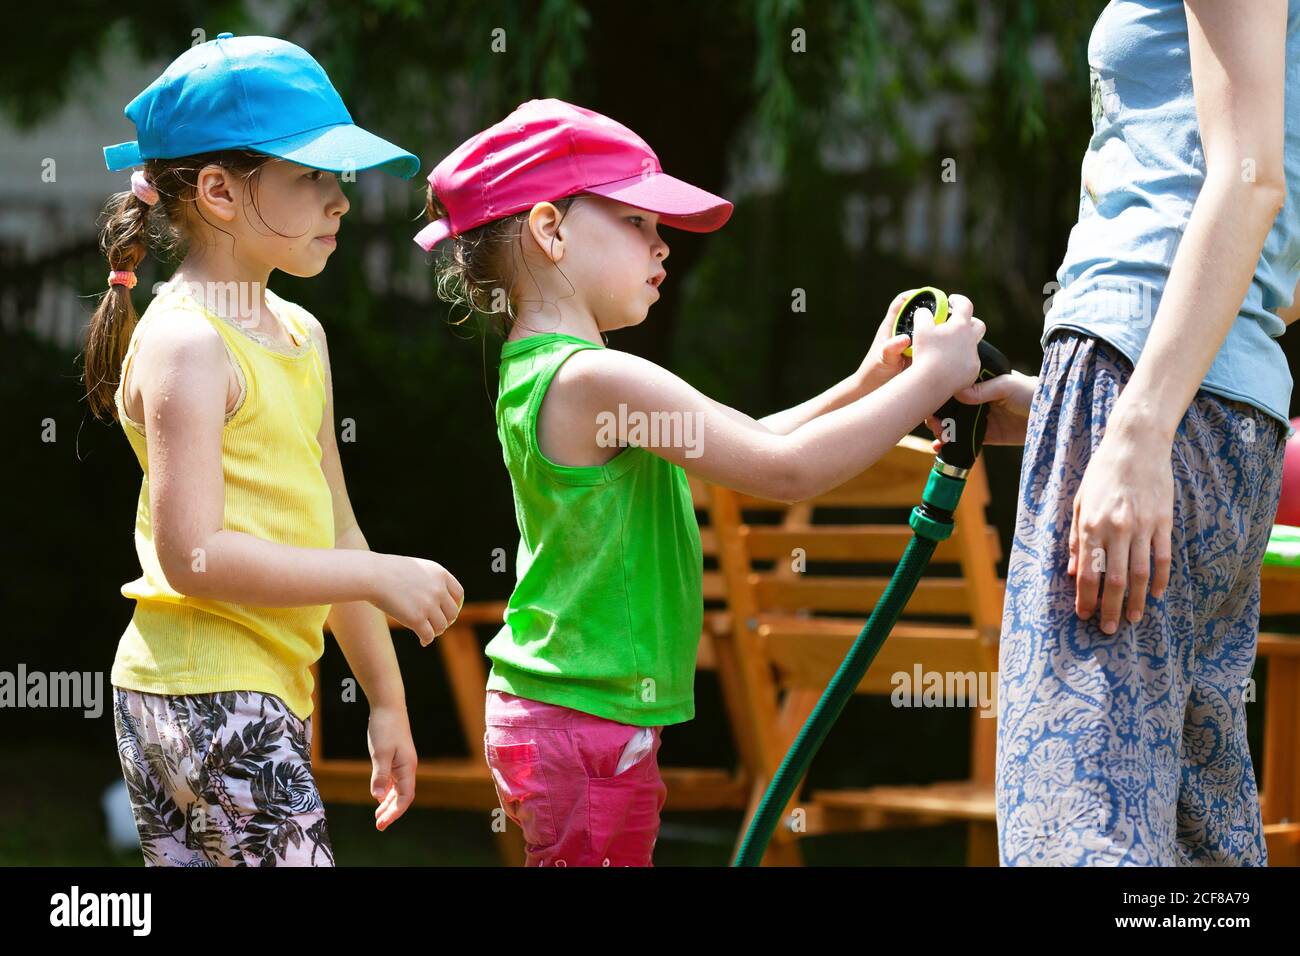 Curious children with their mother examining a turned off water hose in the garden Summer family activities, togetherness, girls enjoying weather Stock Photo